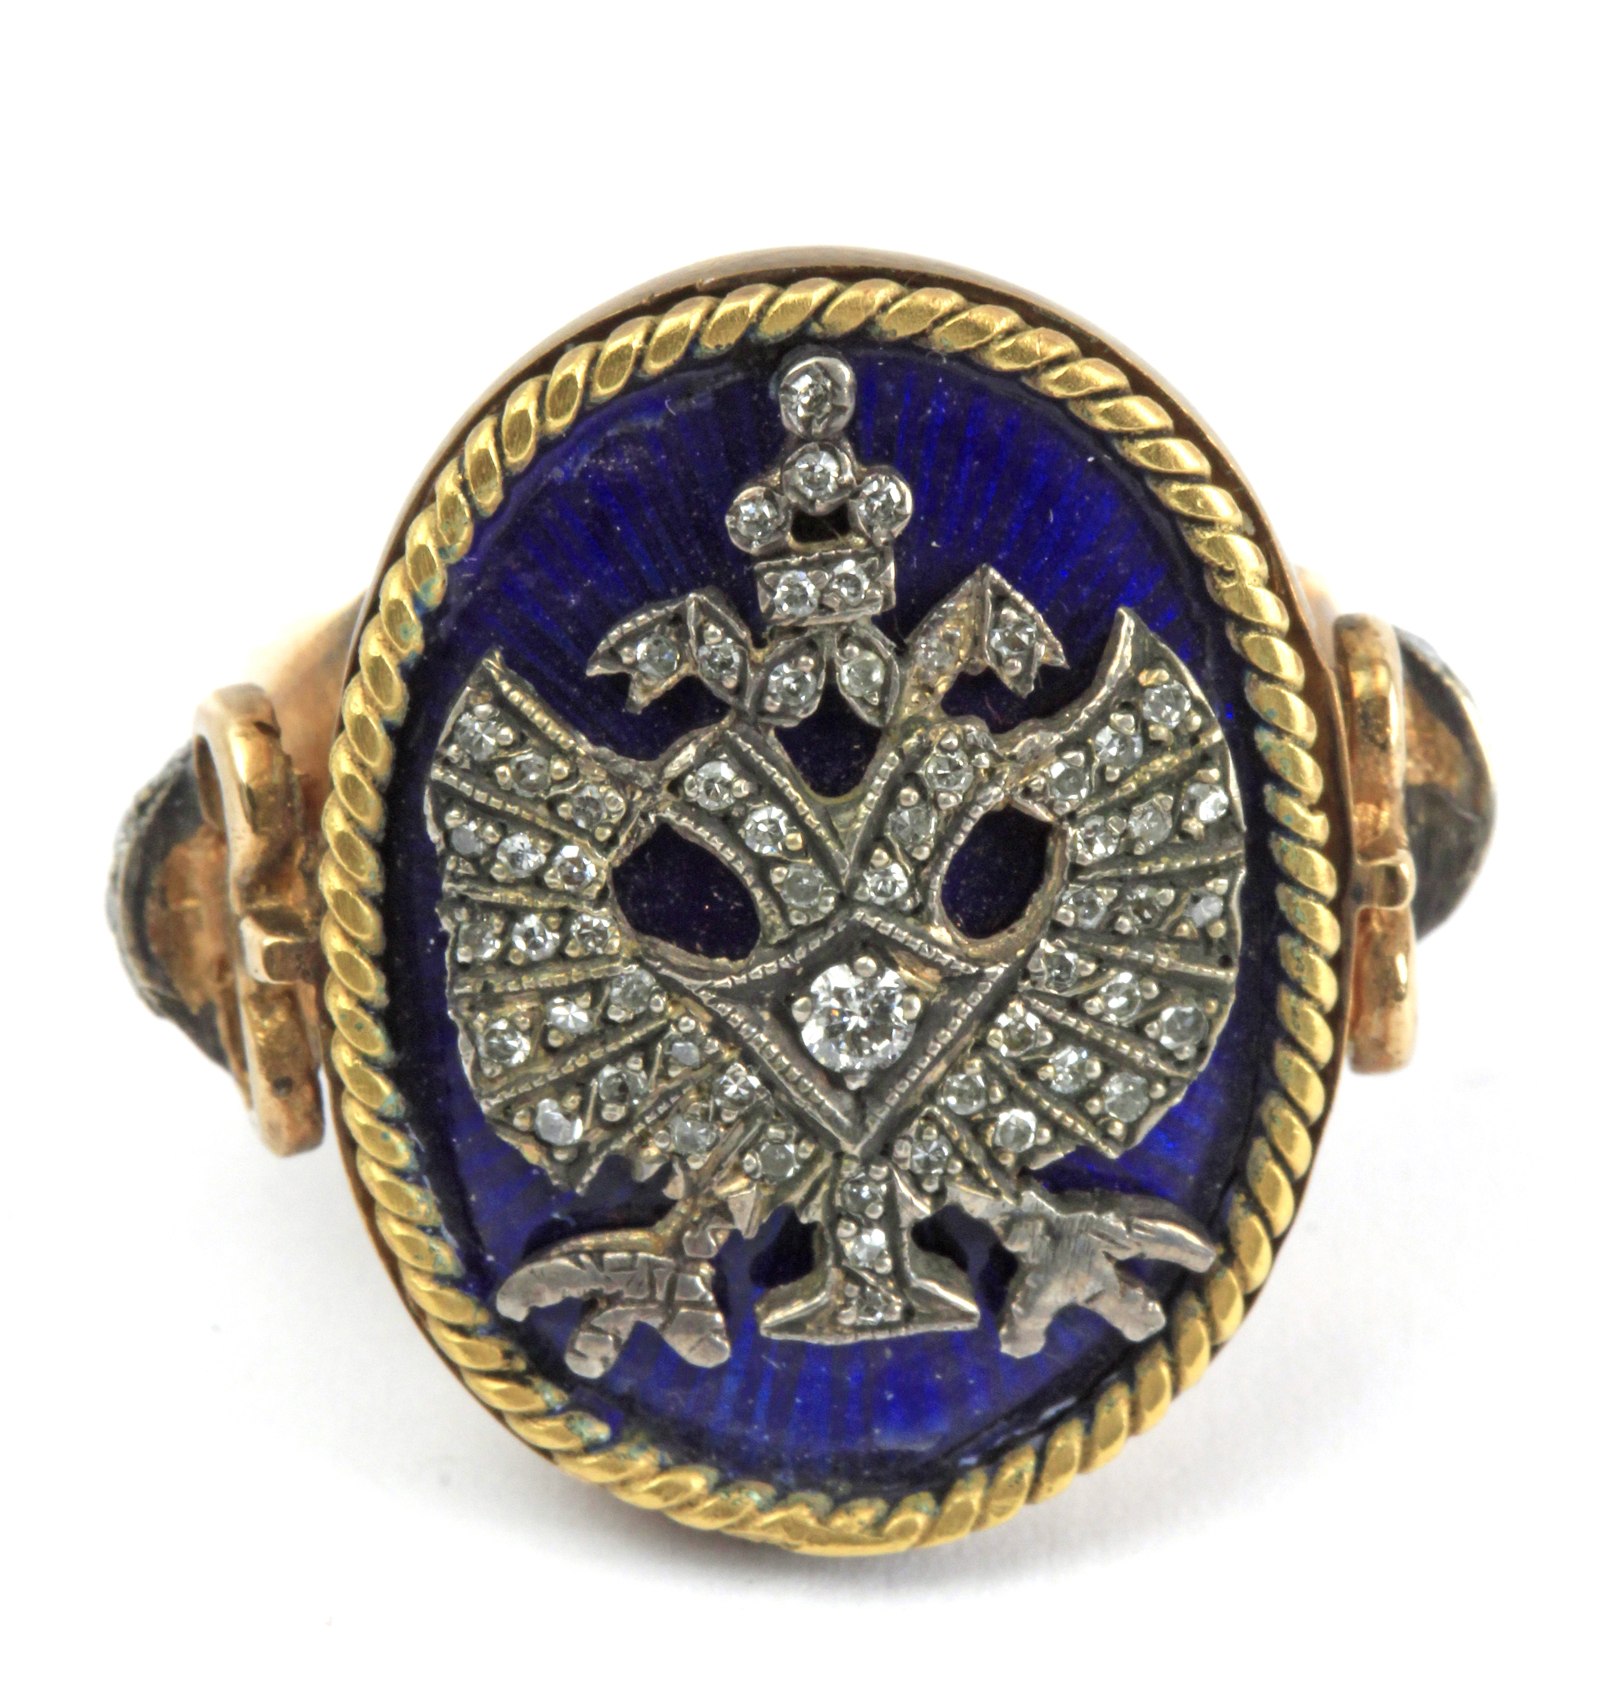 A 19th century Russian signet ring